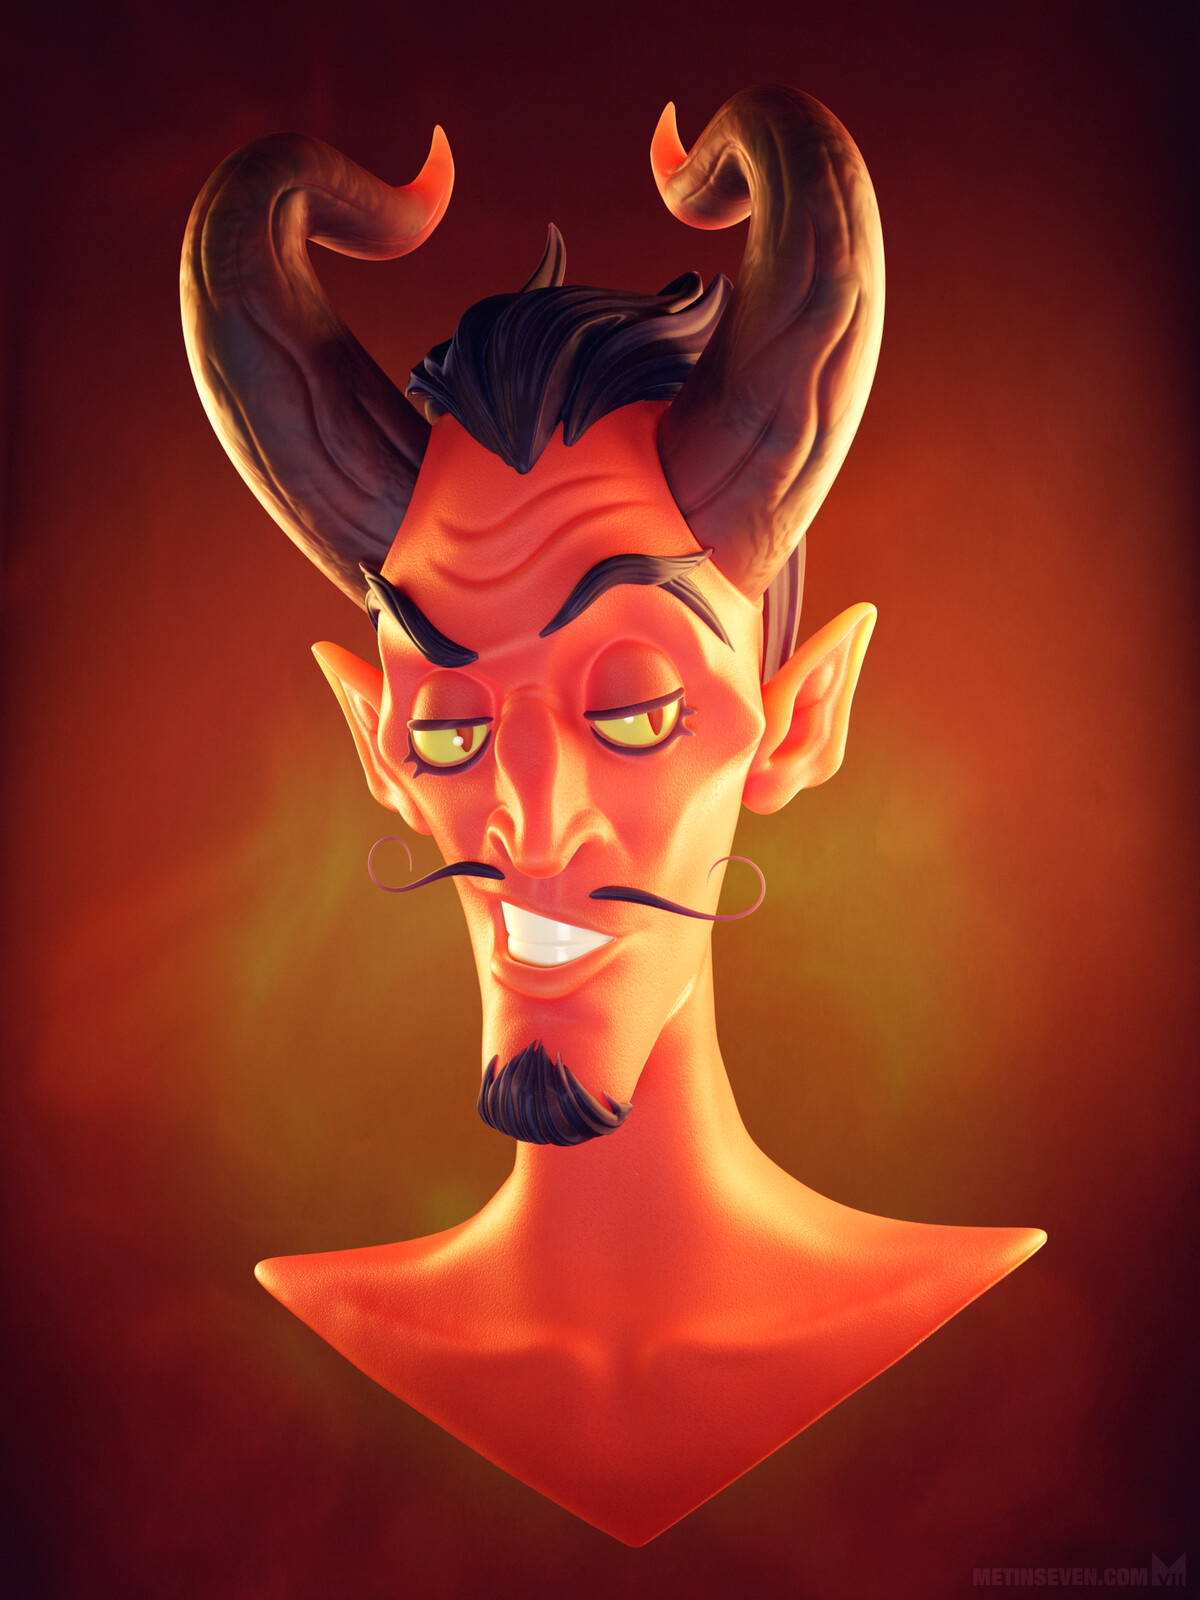 Stylized 3D character sculptor